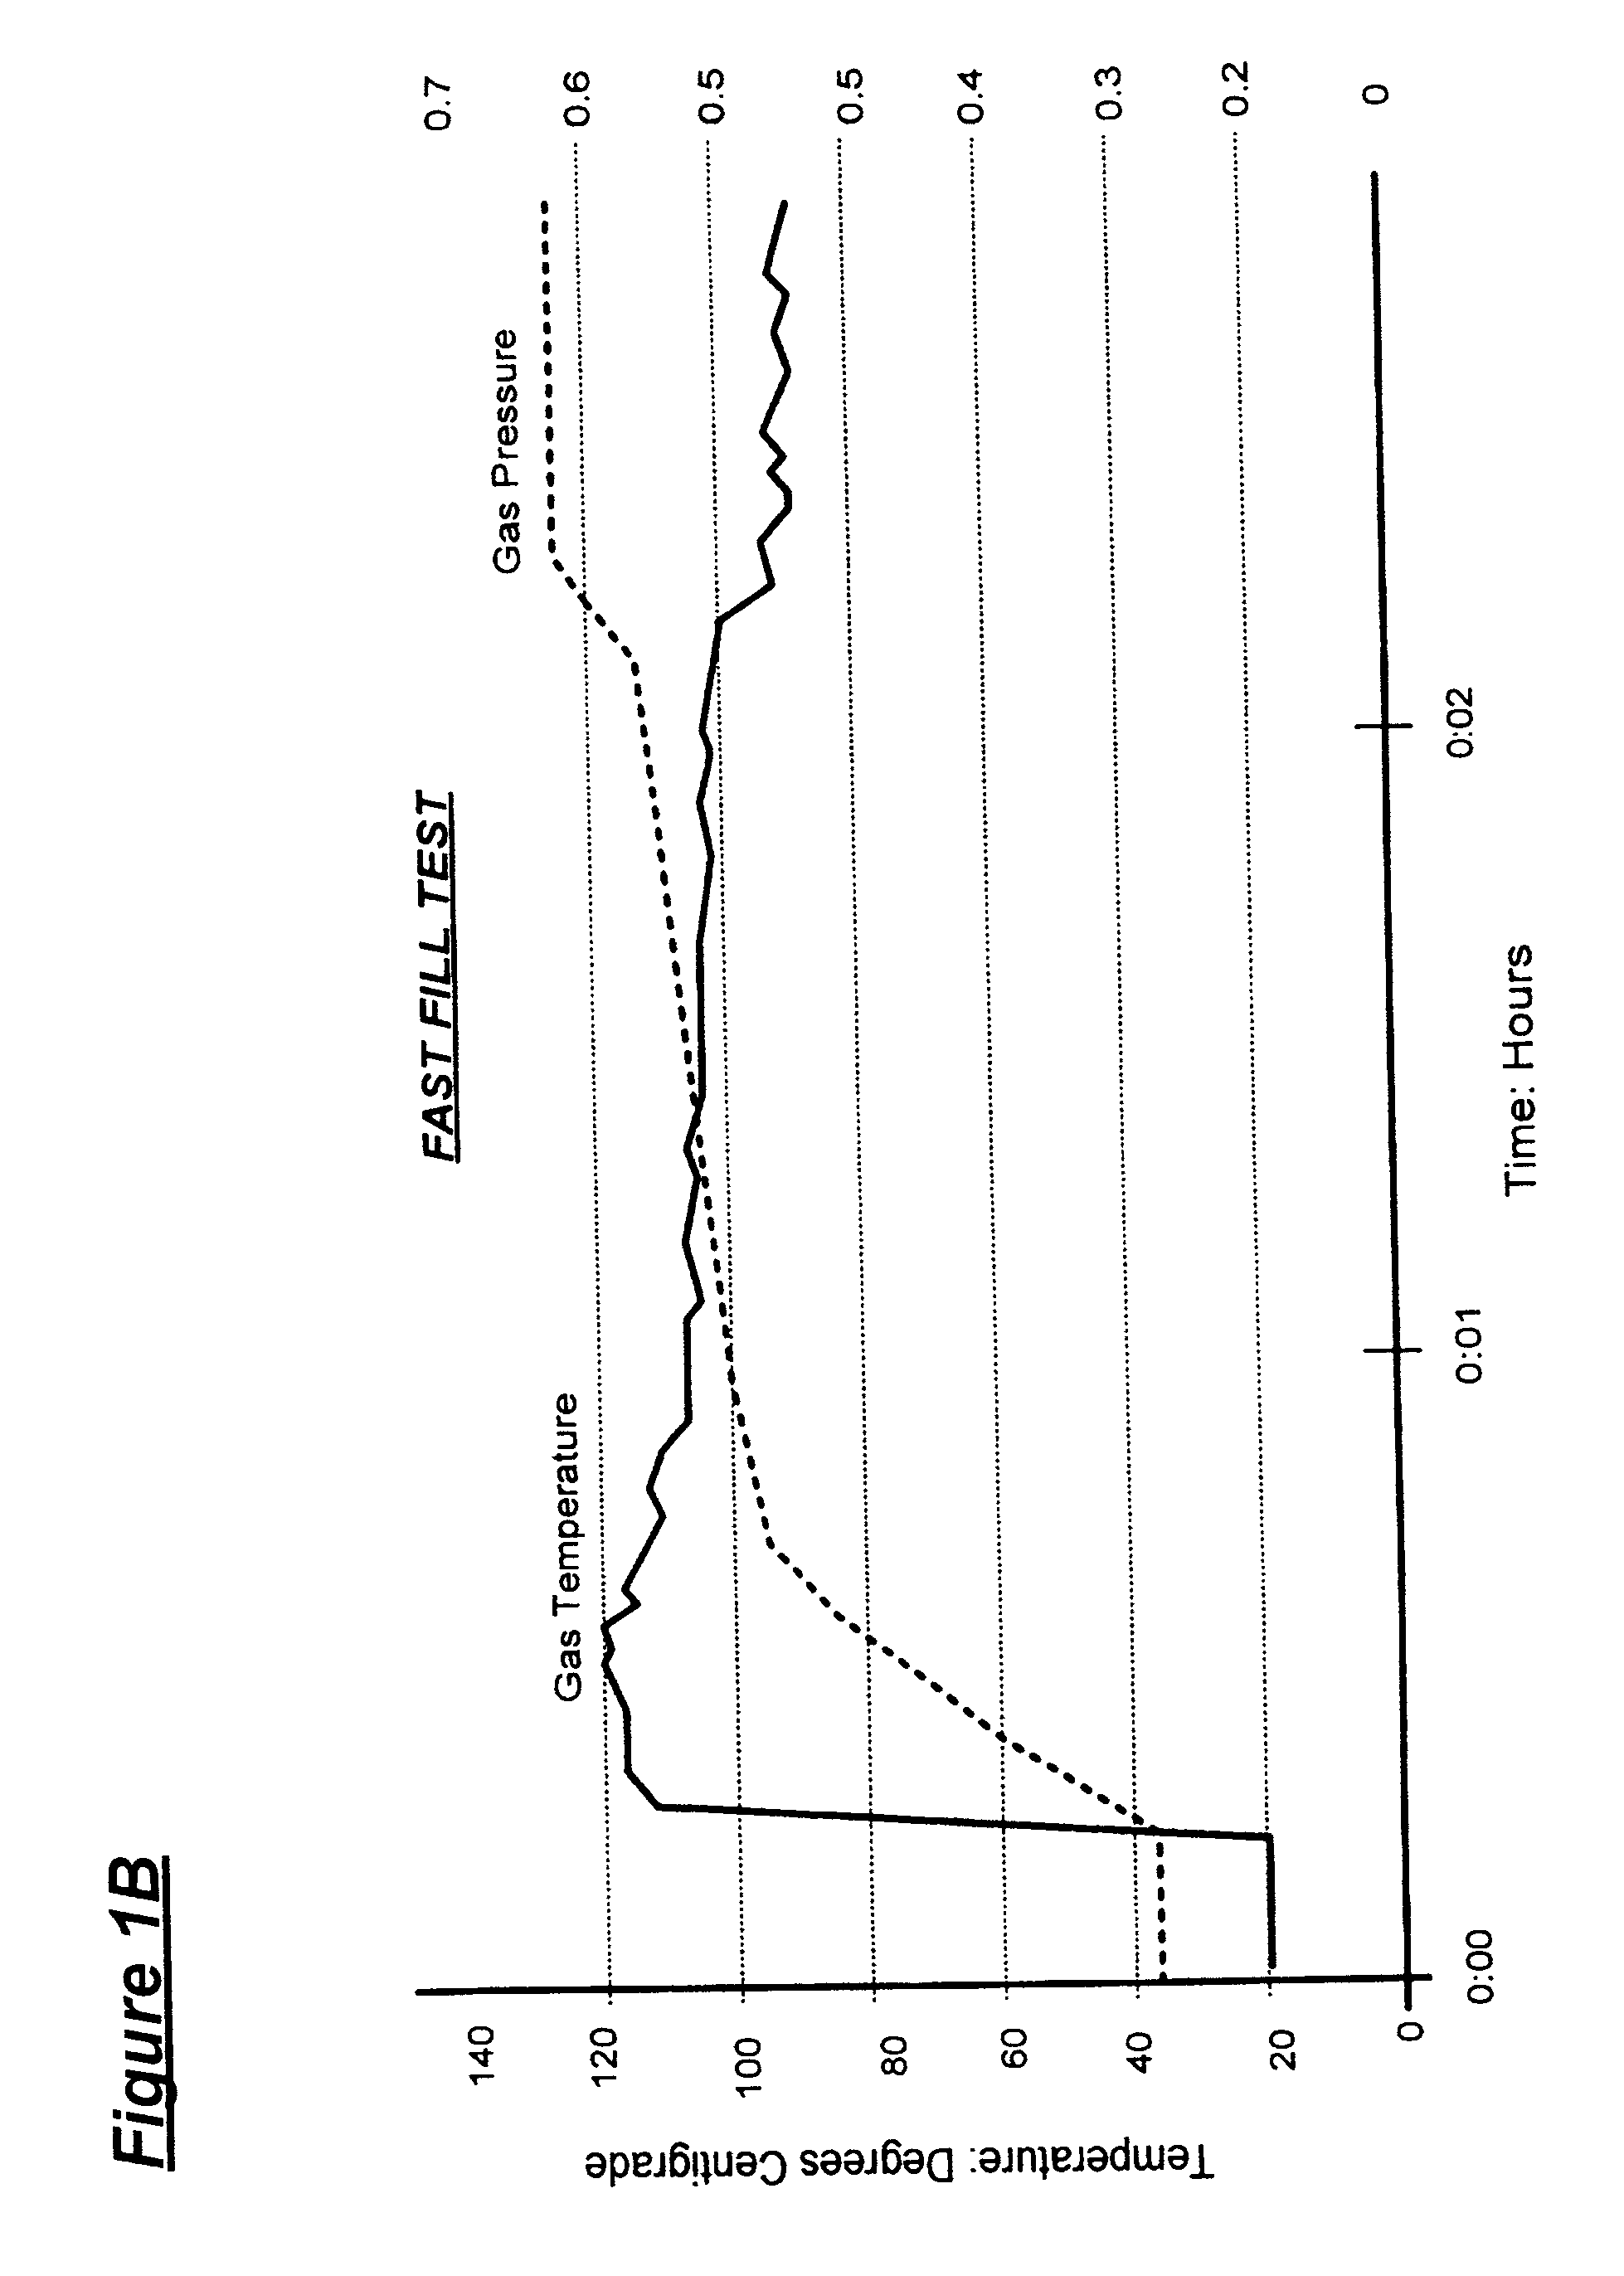 Gas Cooling Method Using a Melting/Solidifying Media for High Pressure Storage Tanks for Compressed Natural Gas or Hydrogen